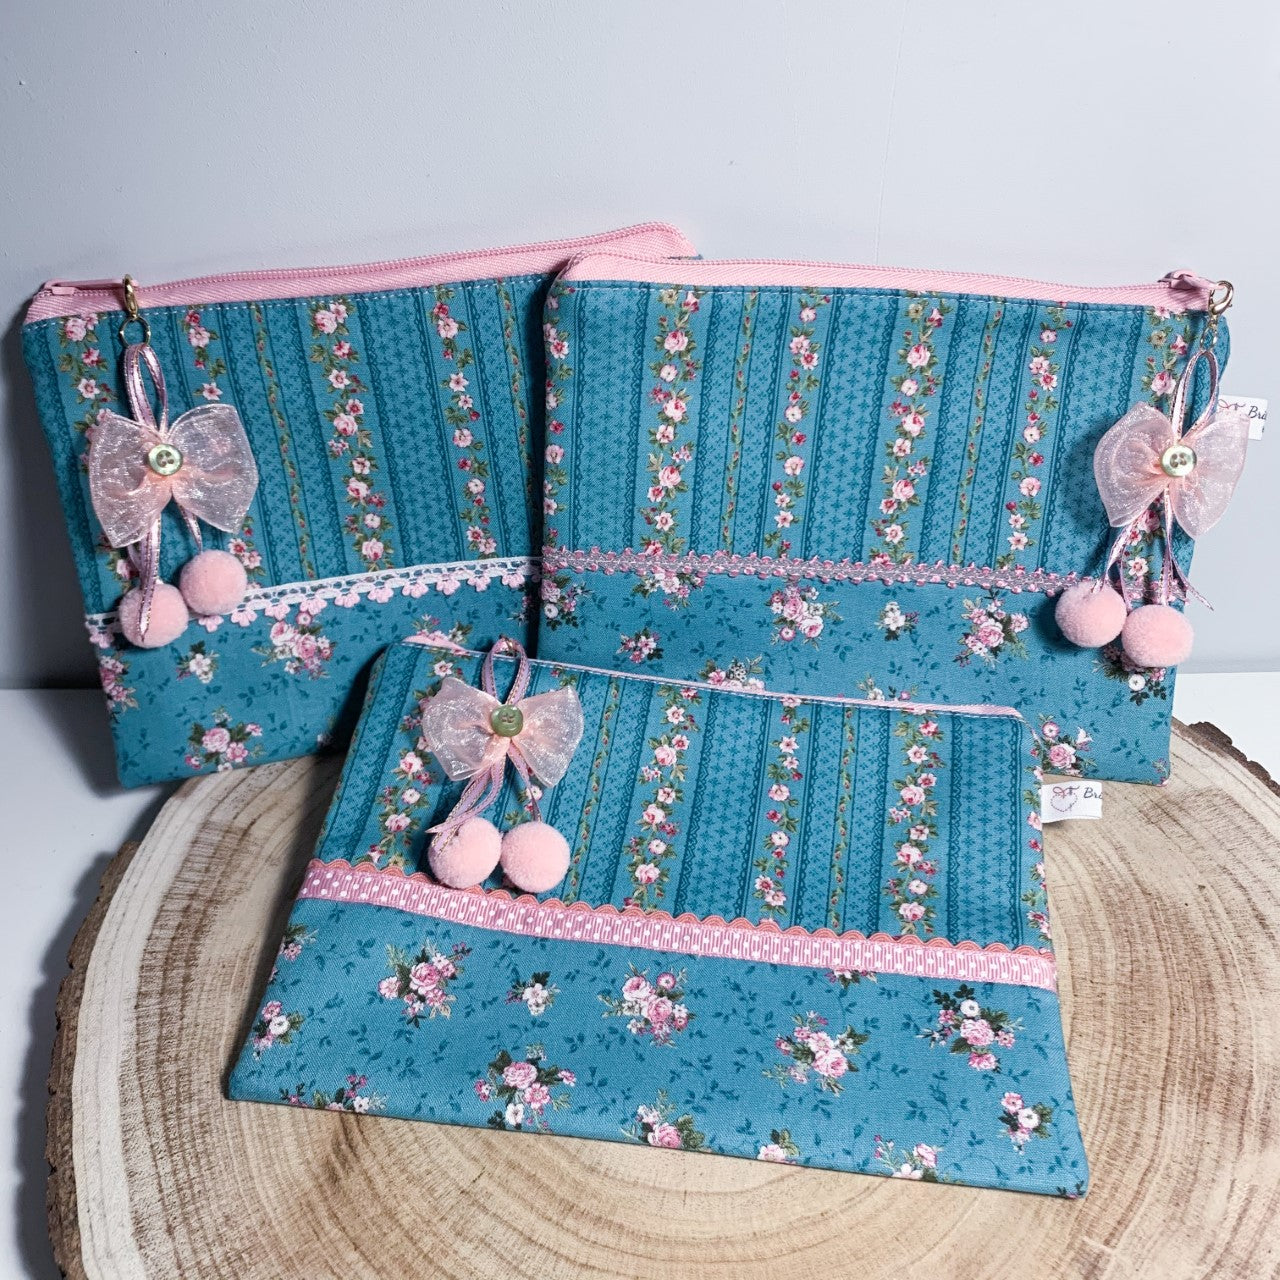 Teal and pink vintage style pouch